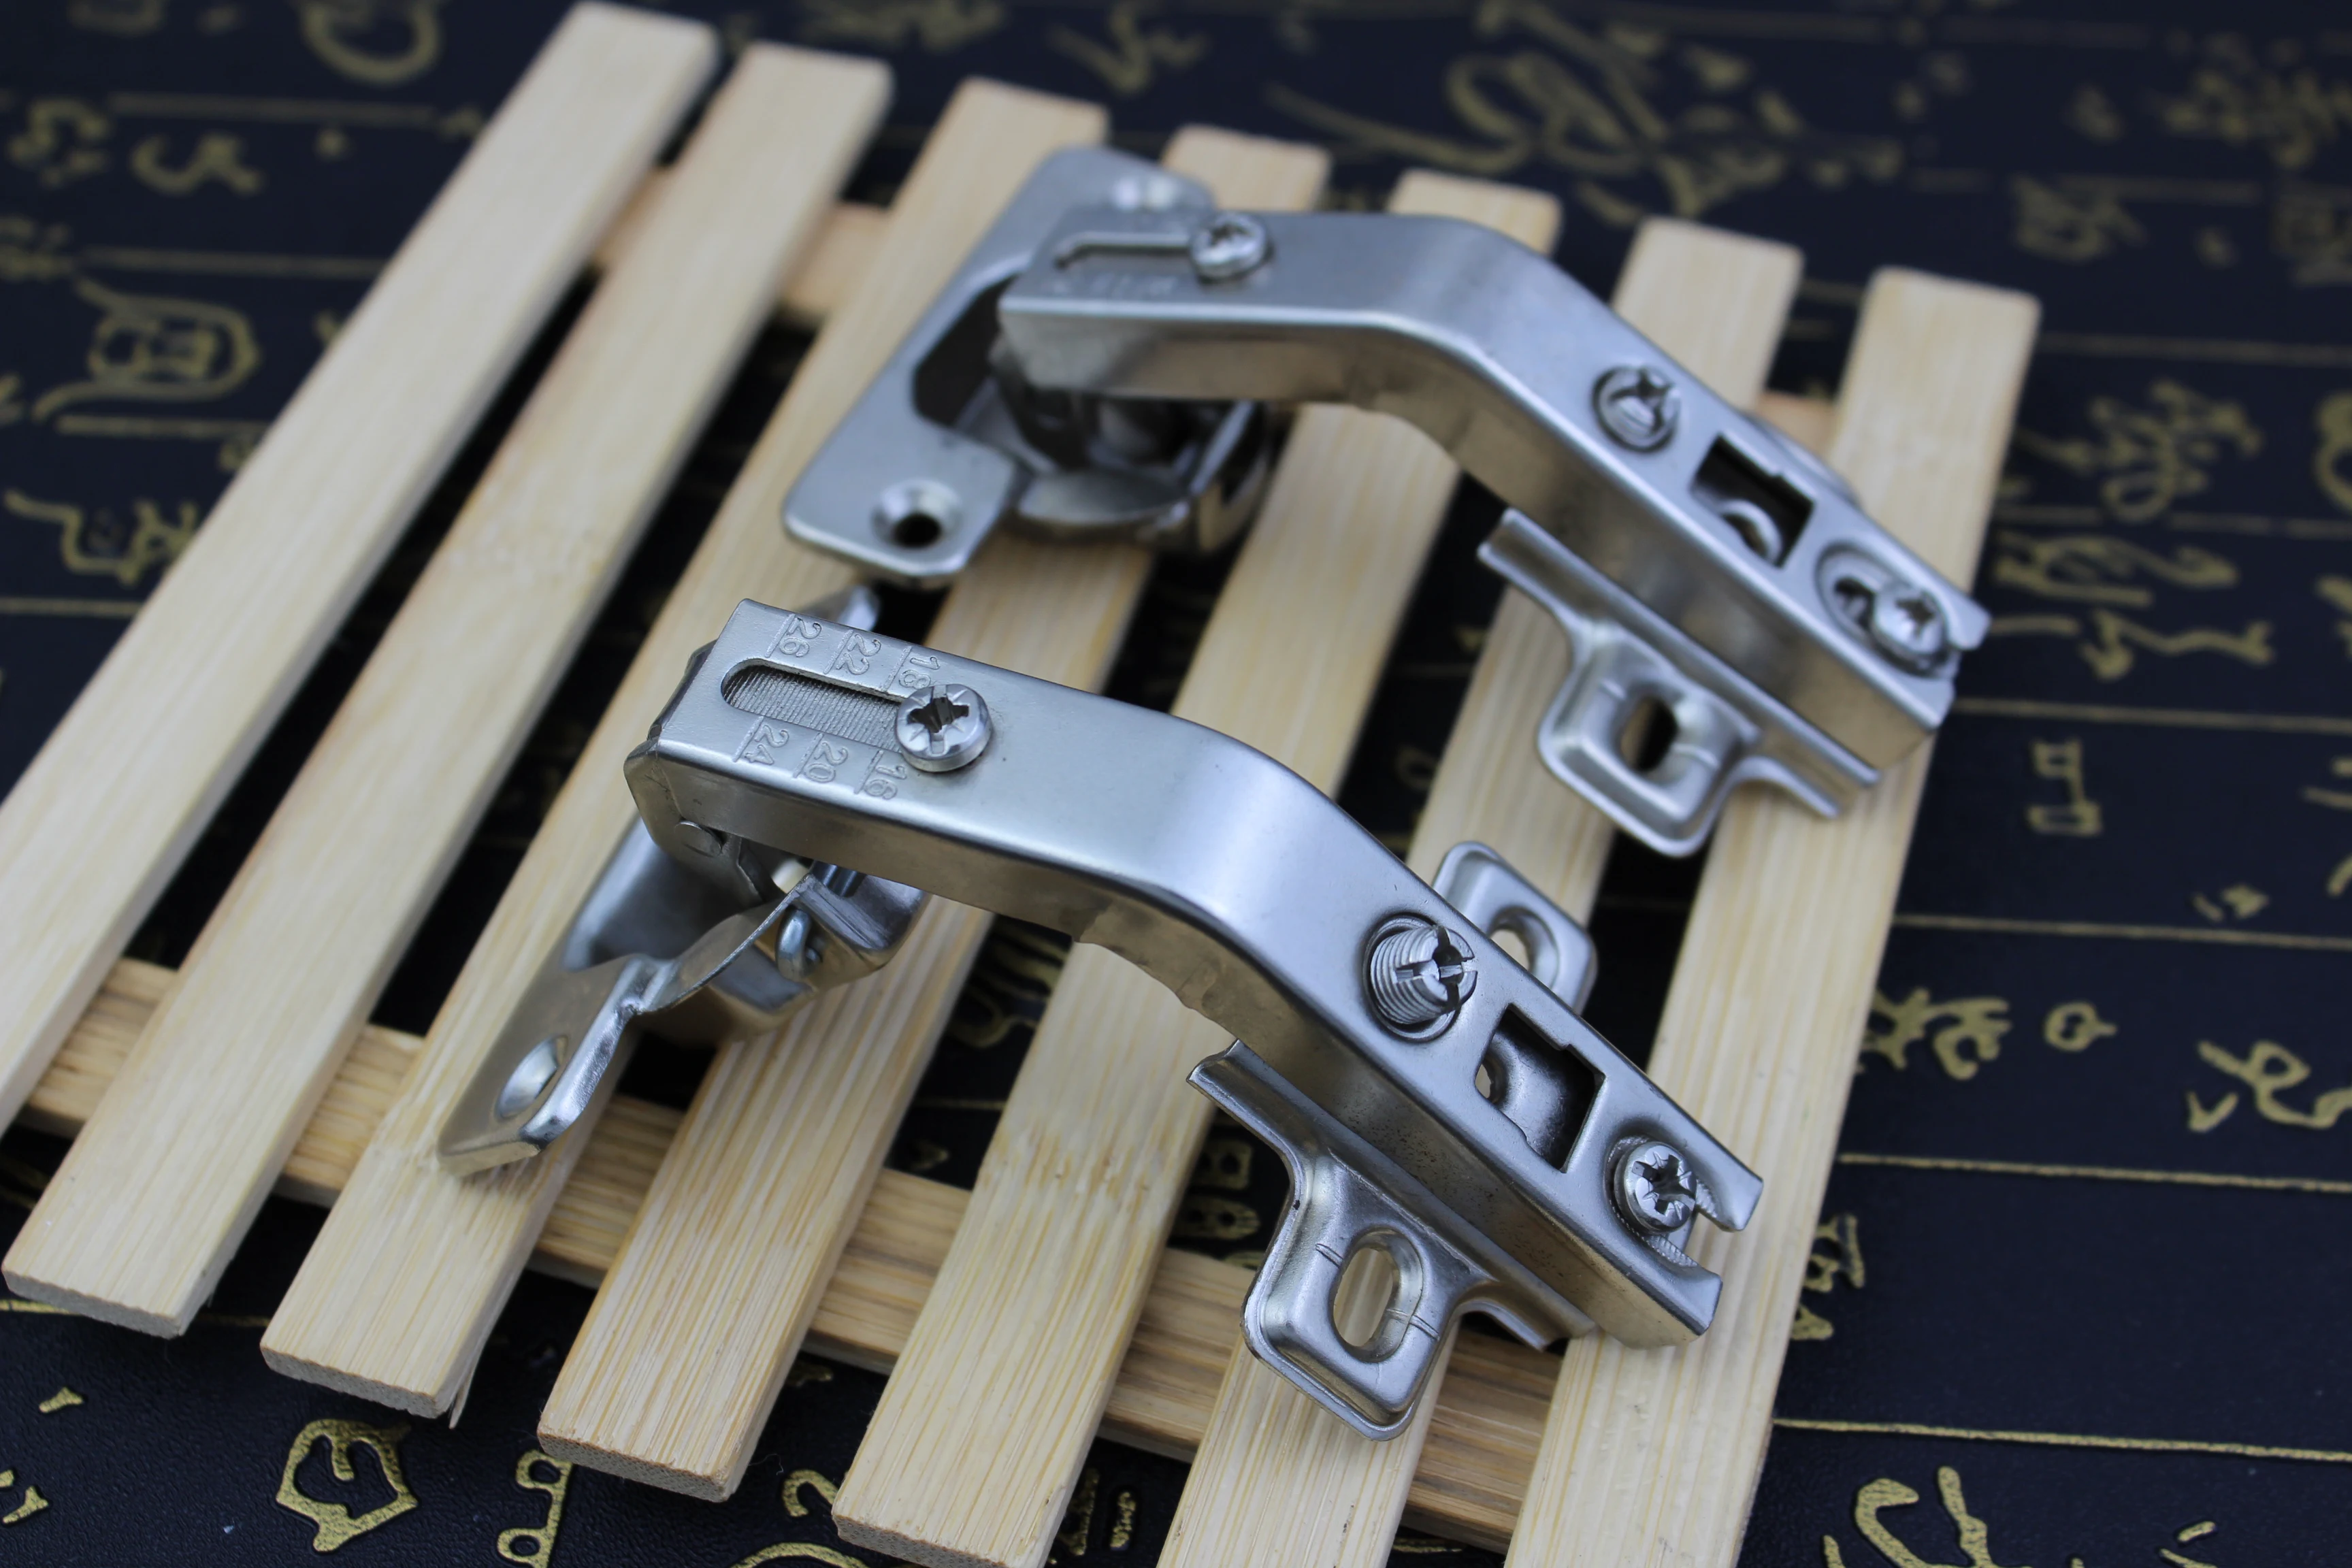 115 degree angle concealed furniture hinges for your choose